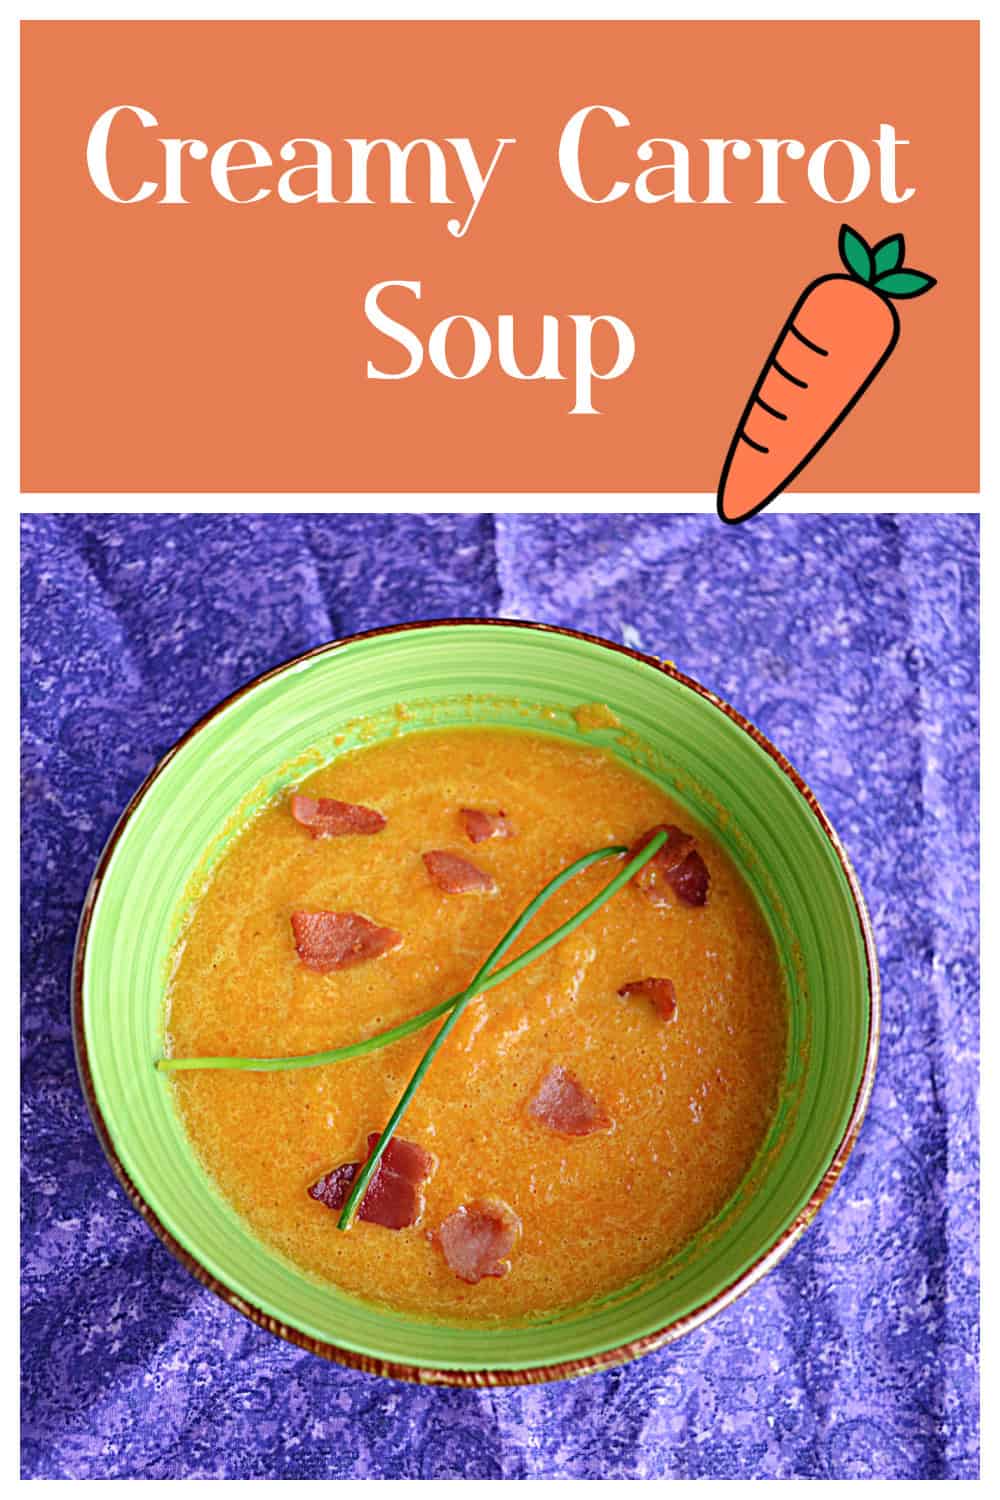 Pin Image: Text title, a bowl of carrot soup with chives on top.